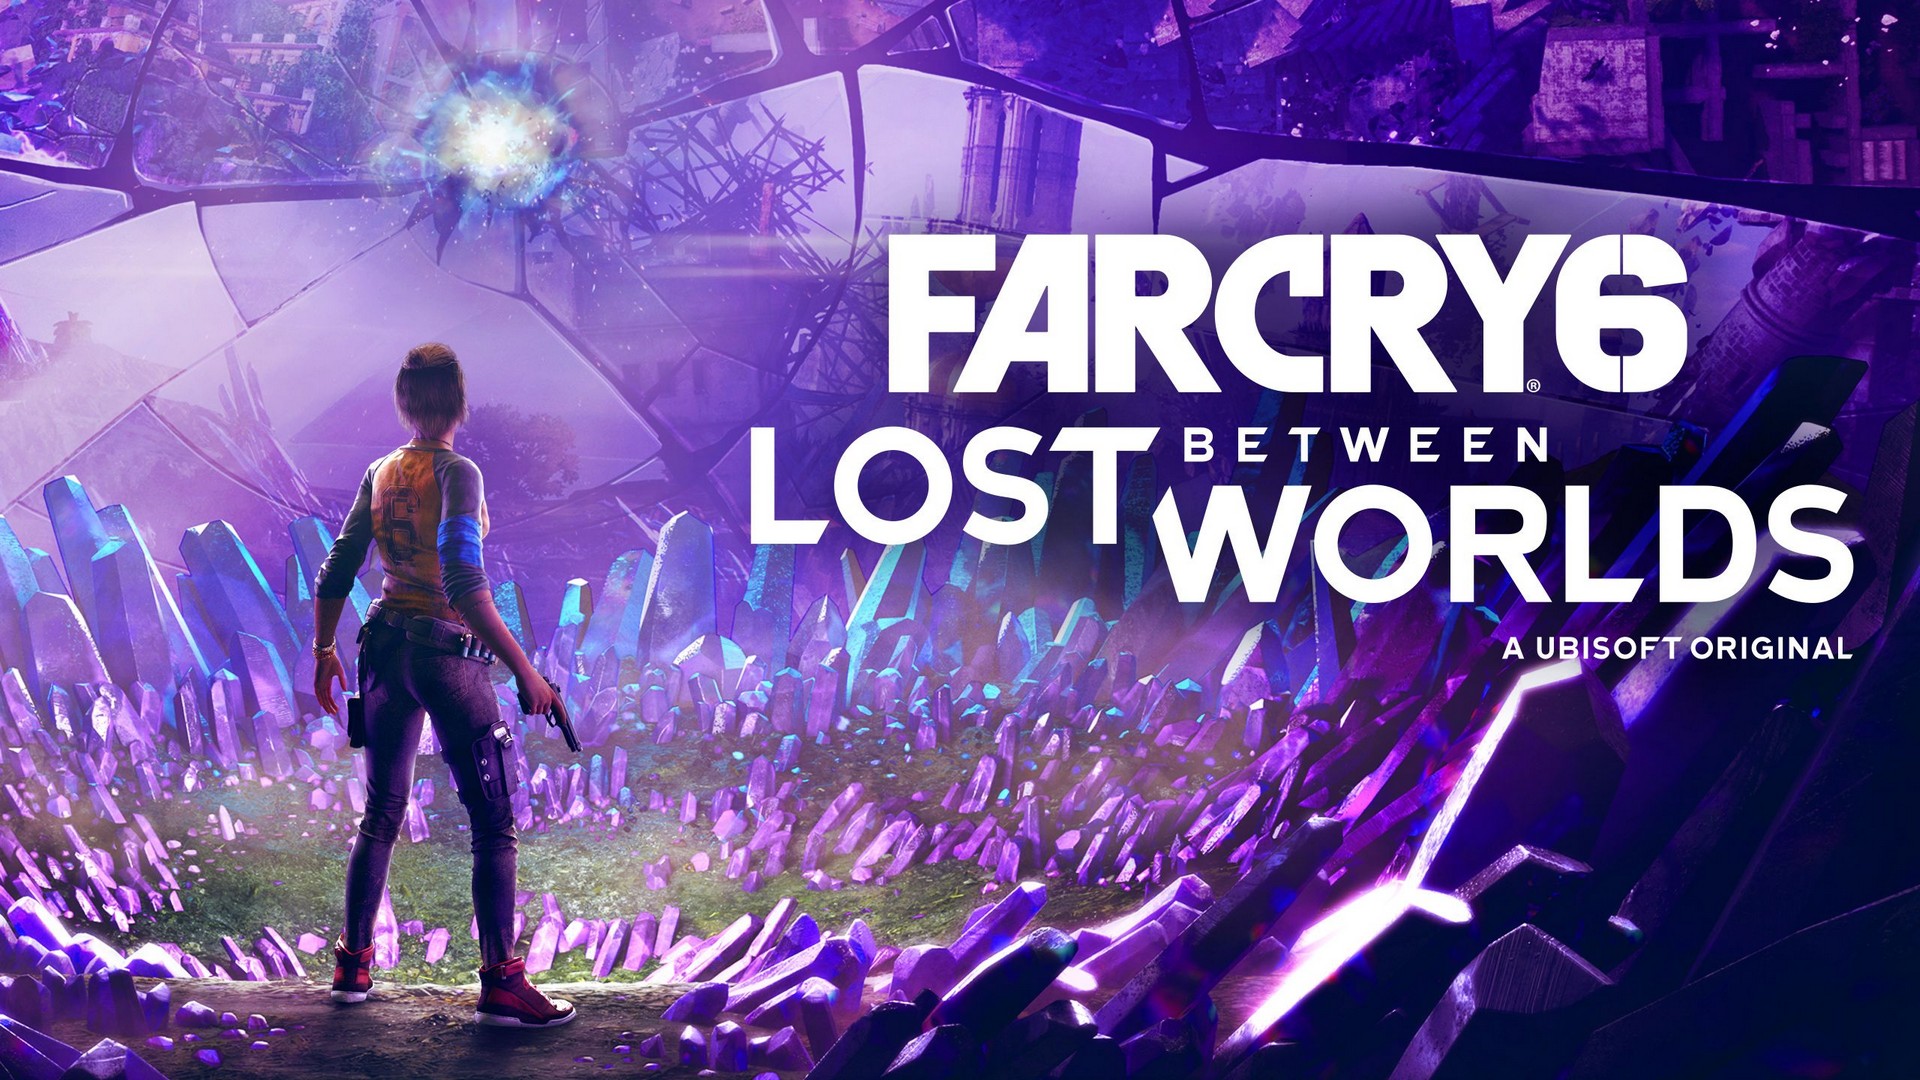 Far Cry 6: Lost Between Worlds Expansion – Available Now